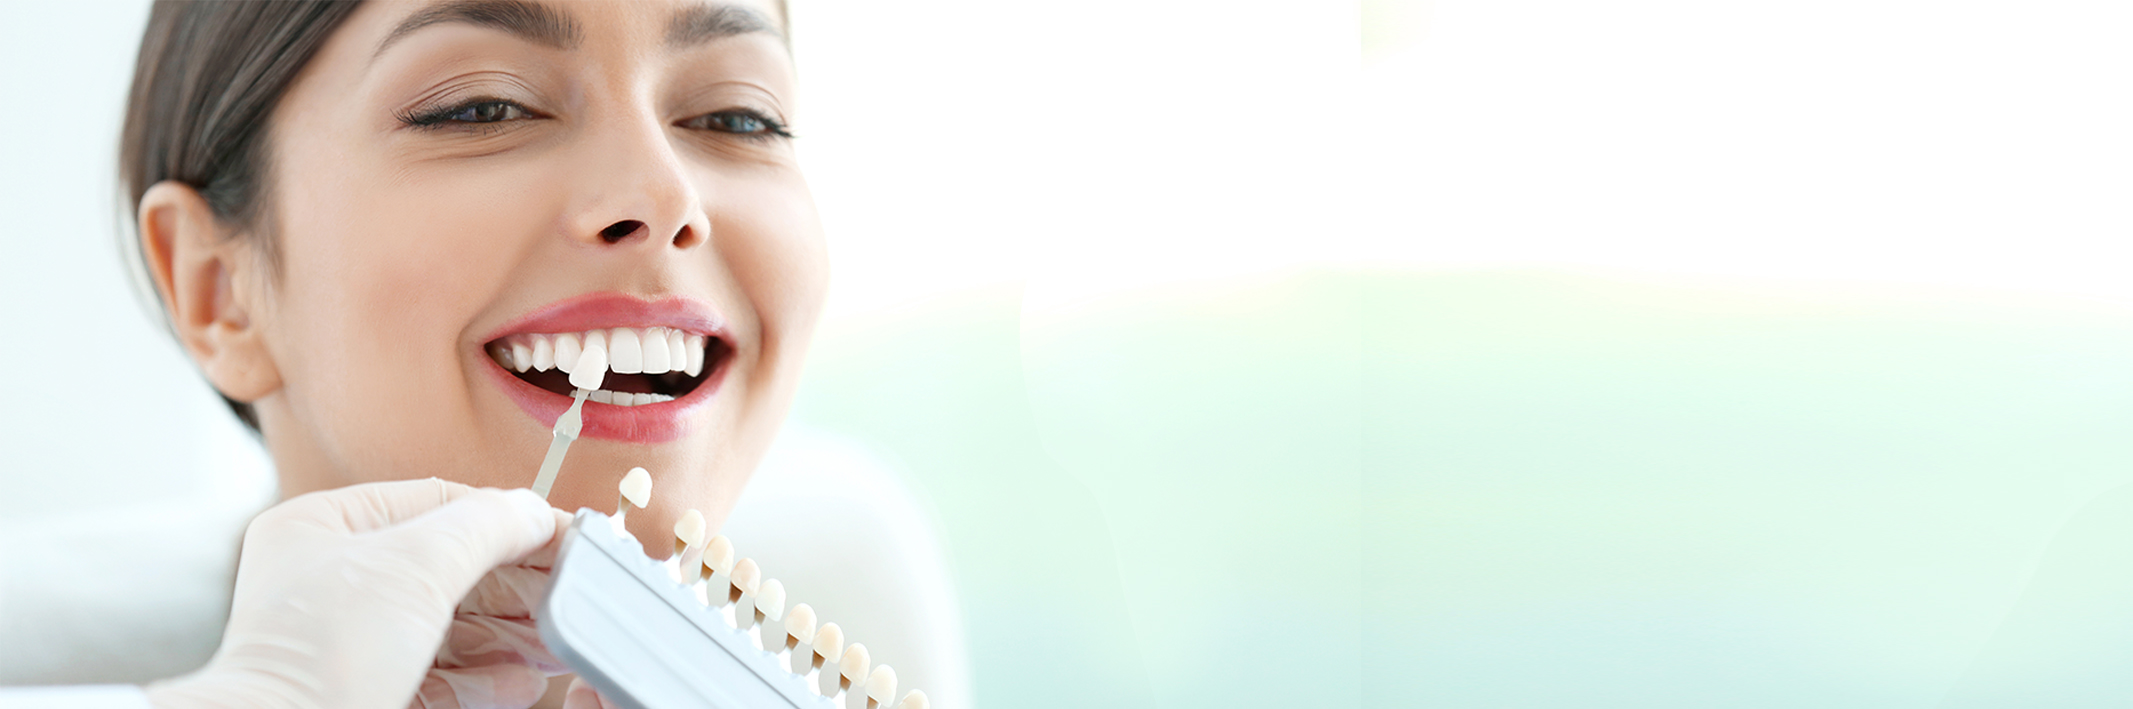 The Facts You Need to Know About Dental Veneers